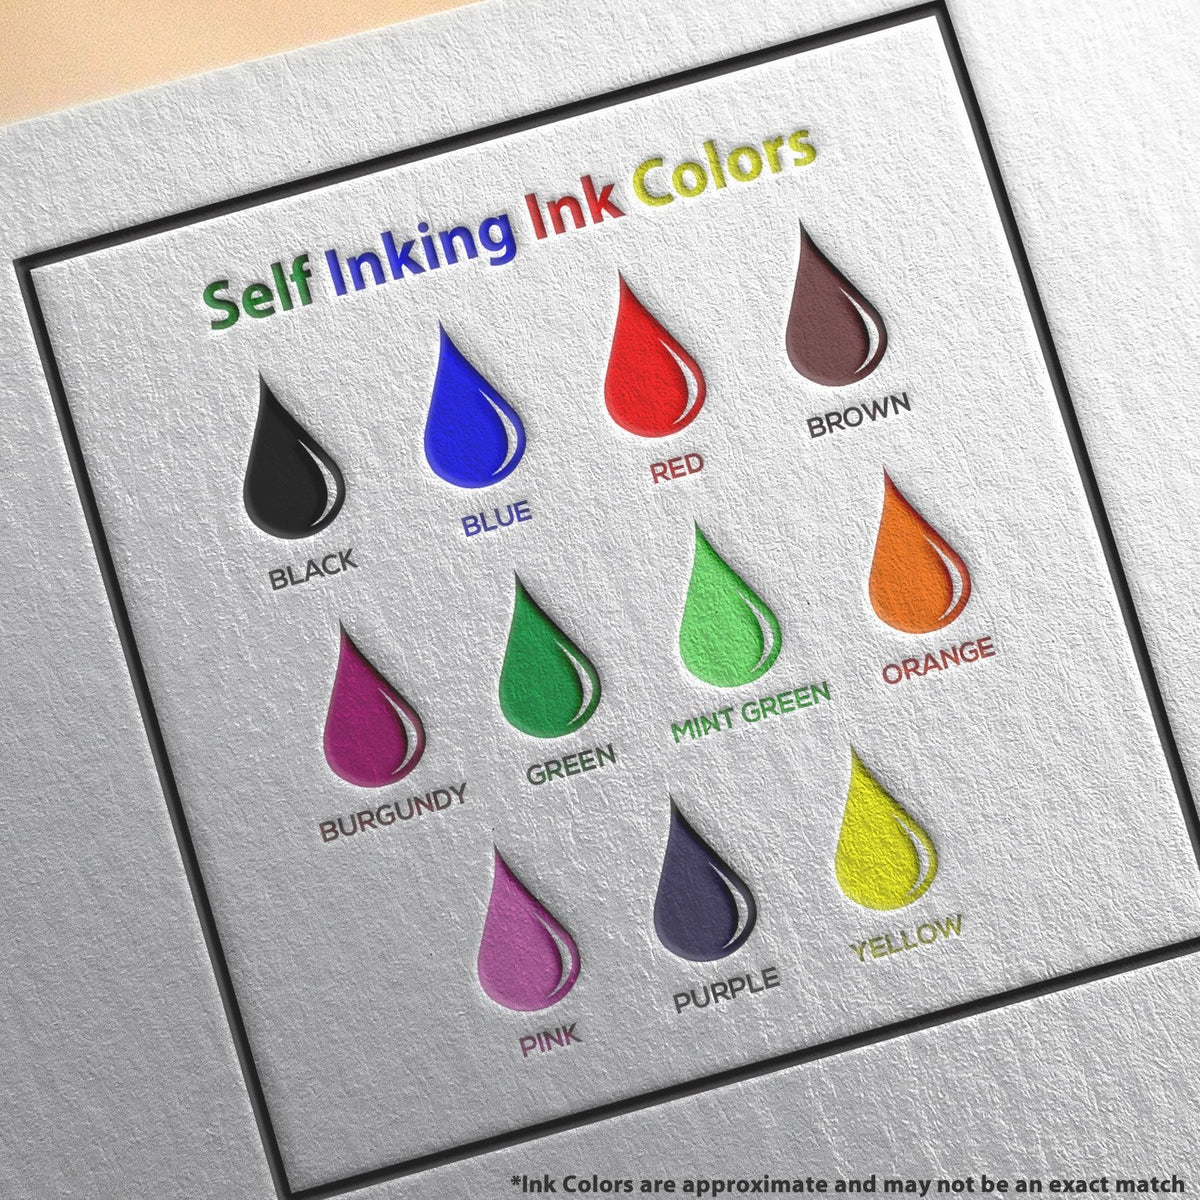 Self-Inking Italic Personal Confidential Stamp Ink Color Options